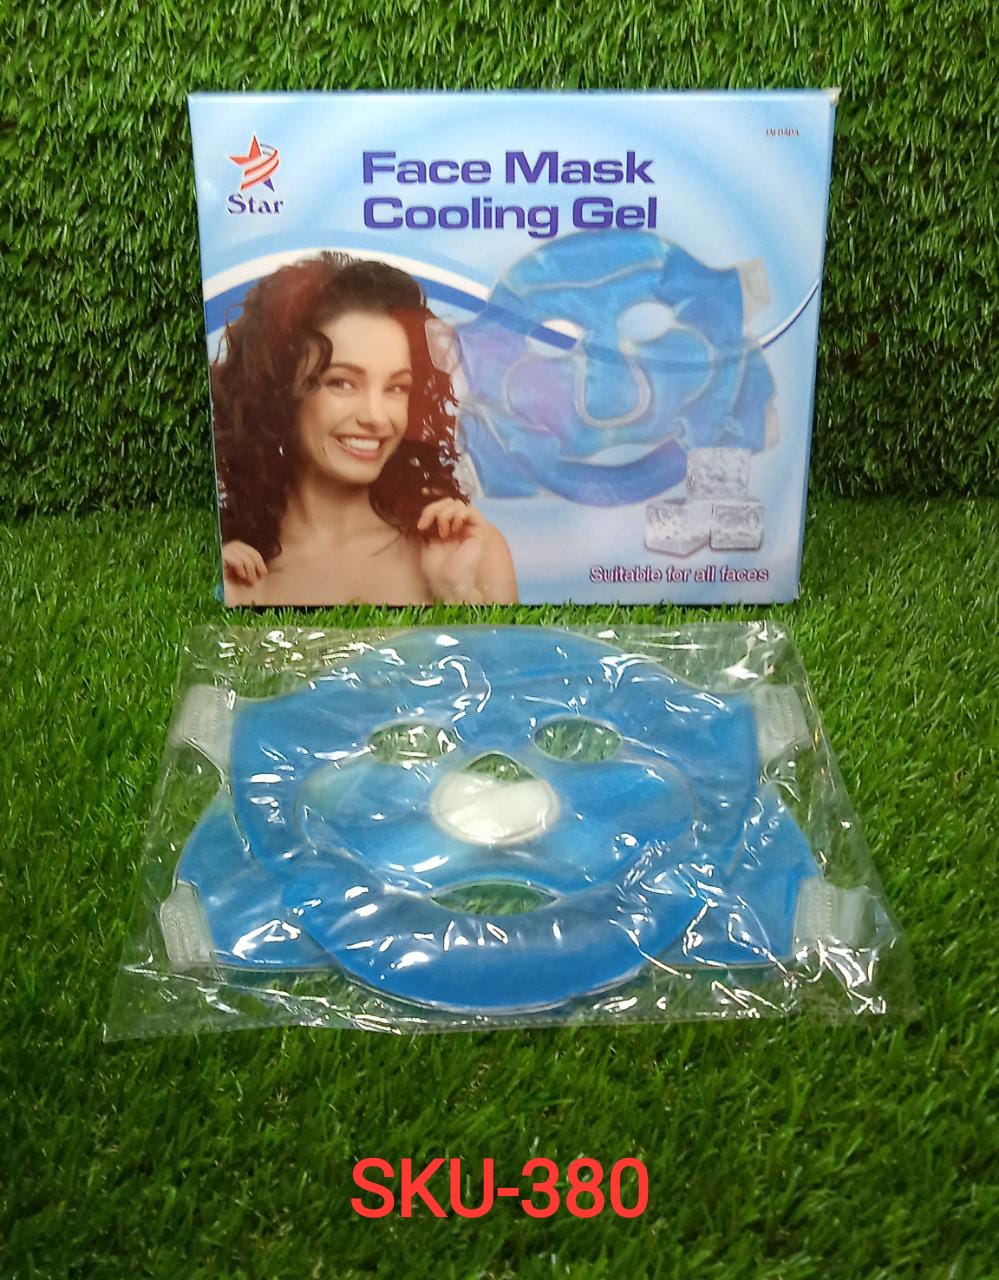 0380 Cooling Gel Face Mask with Strap-on Velcro, Medium DeoDap